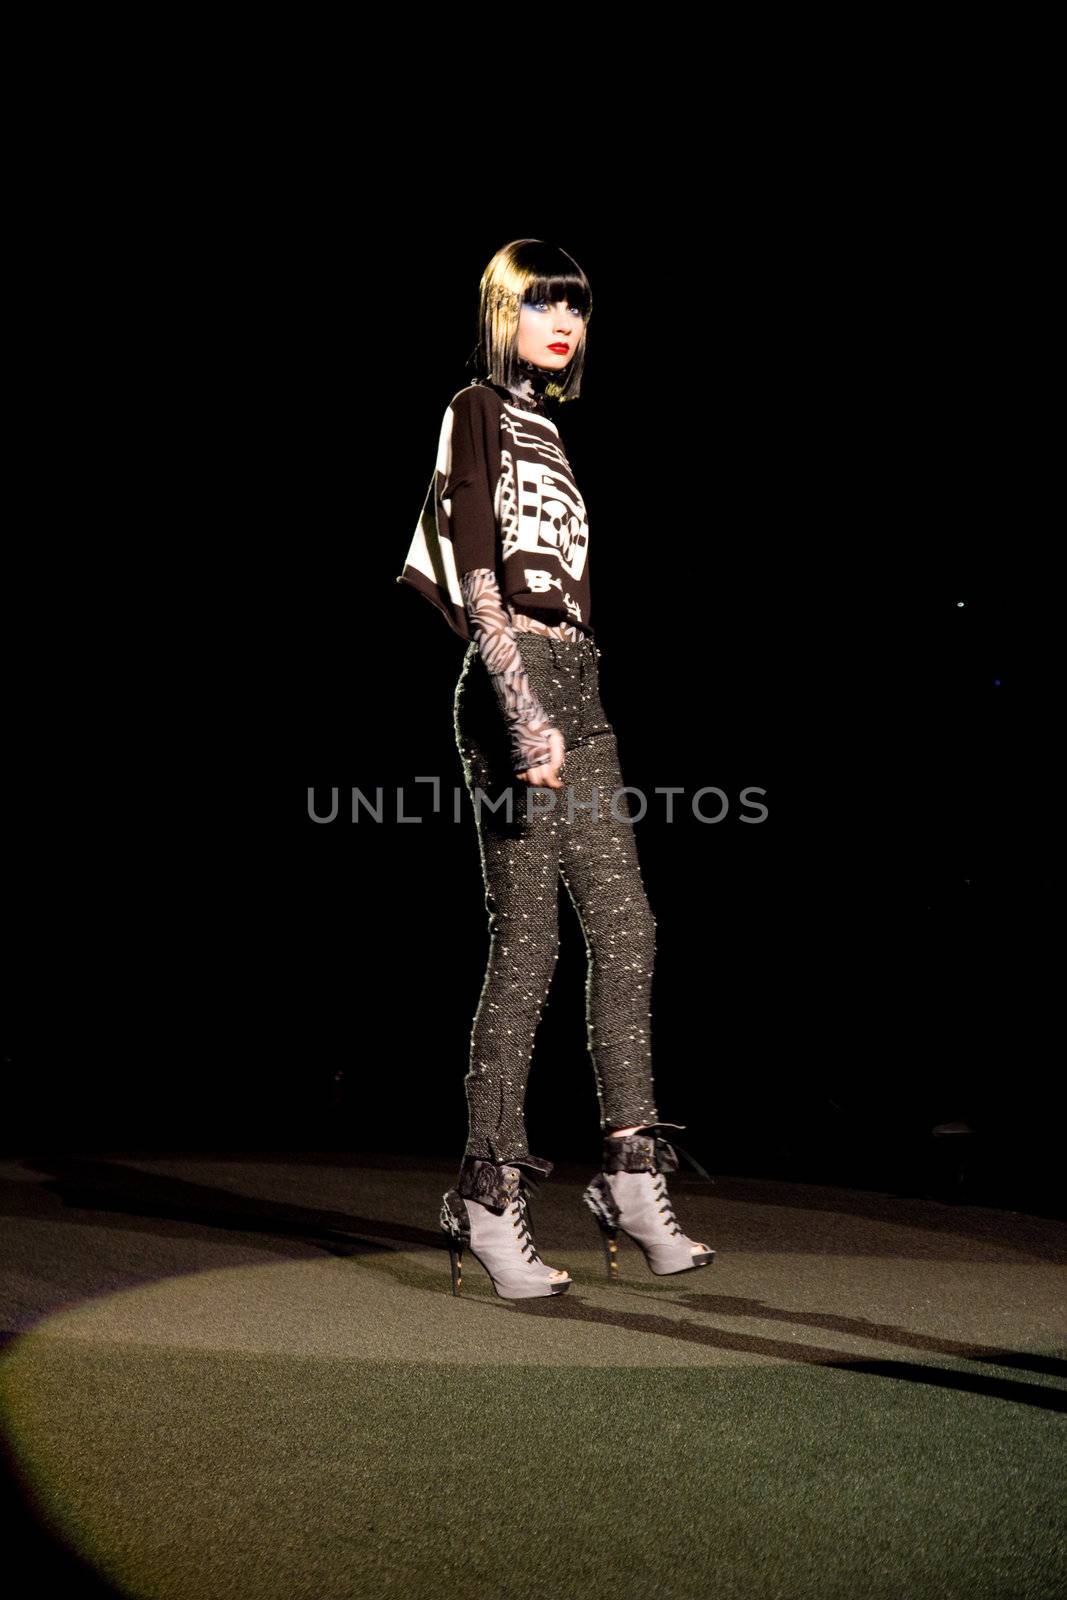 Model at the Betsey Johnson Fall 2011 Collection Runway at Fashion Week New York by photopro